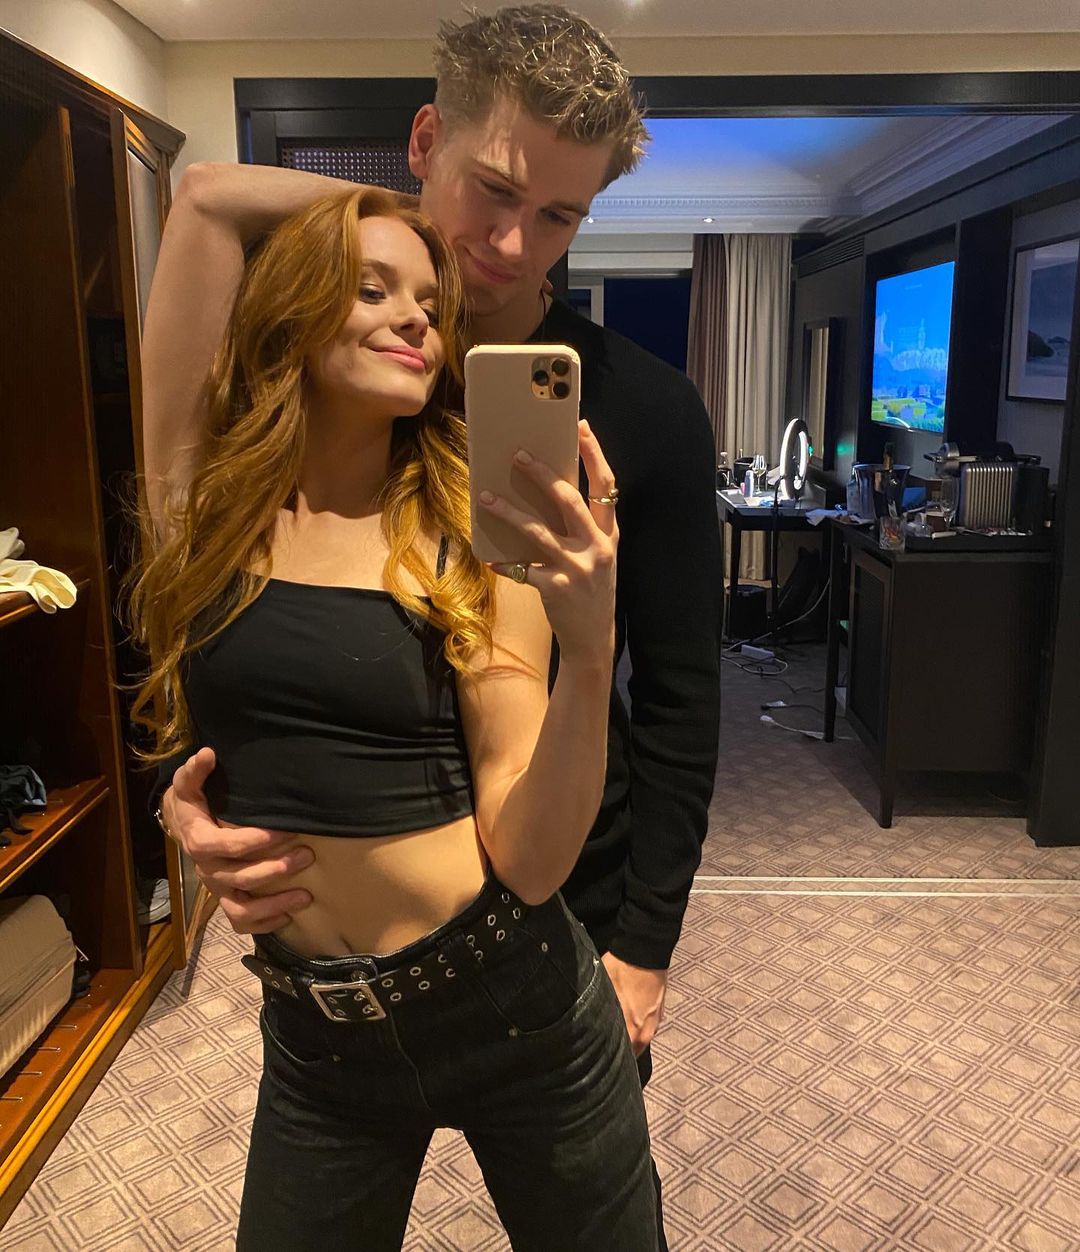 Abigail Cowen and Danny Griffin's first photo together on Cowen's Instagram.